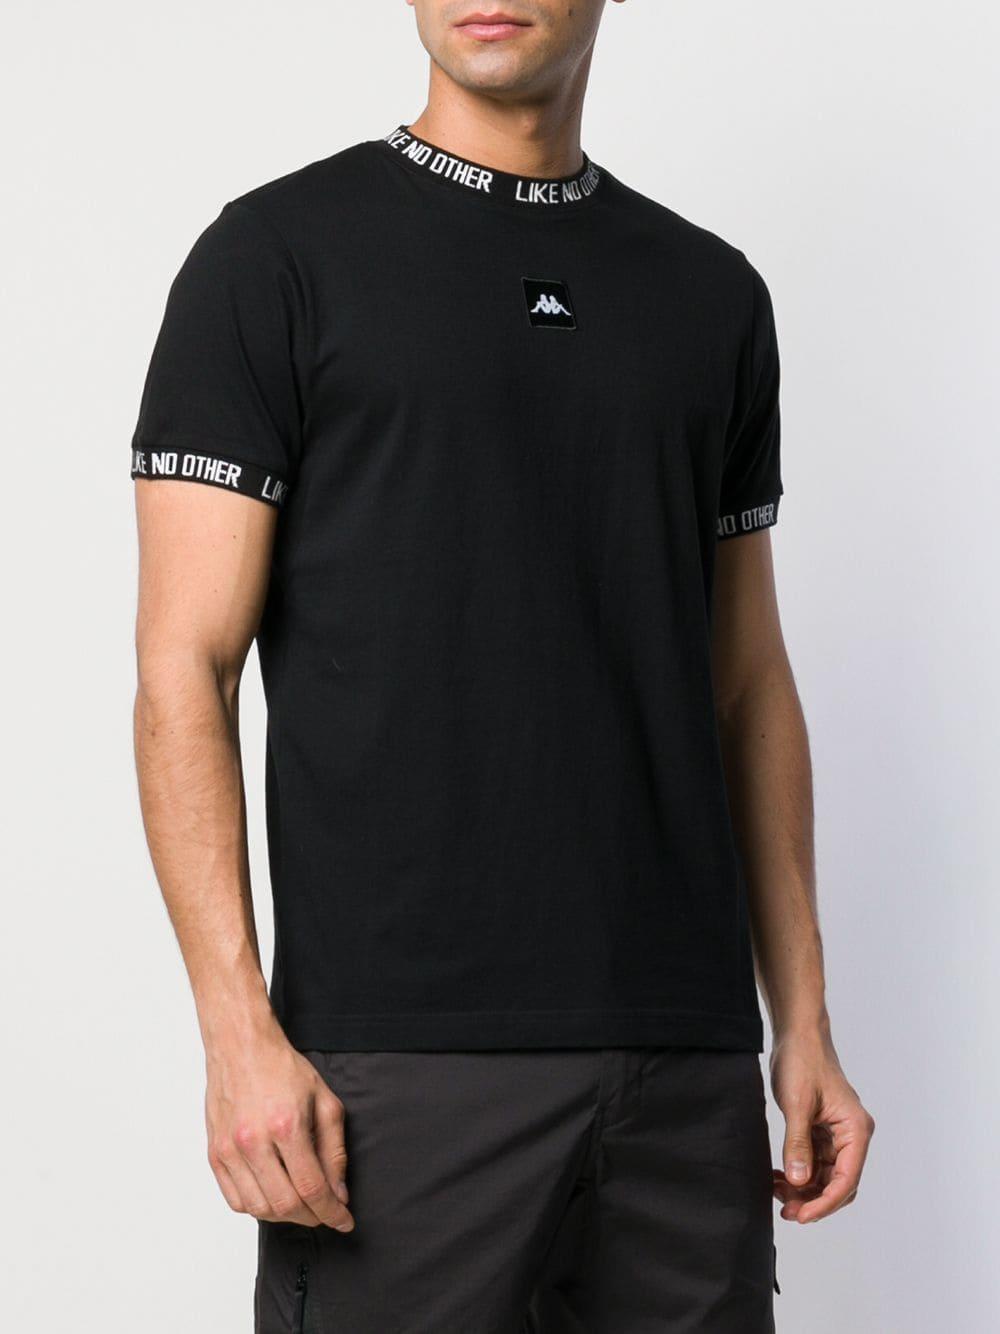 Kappa Cotton Like No Other T-shirt in Black for Men | Lyst